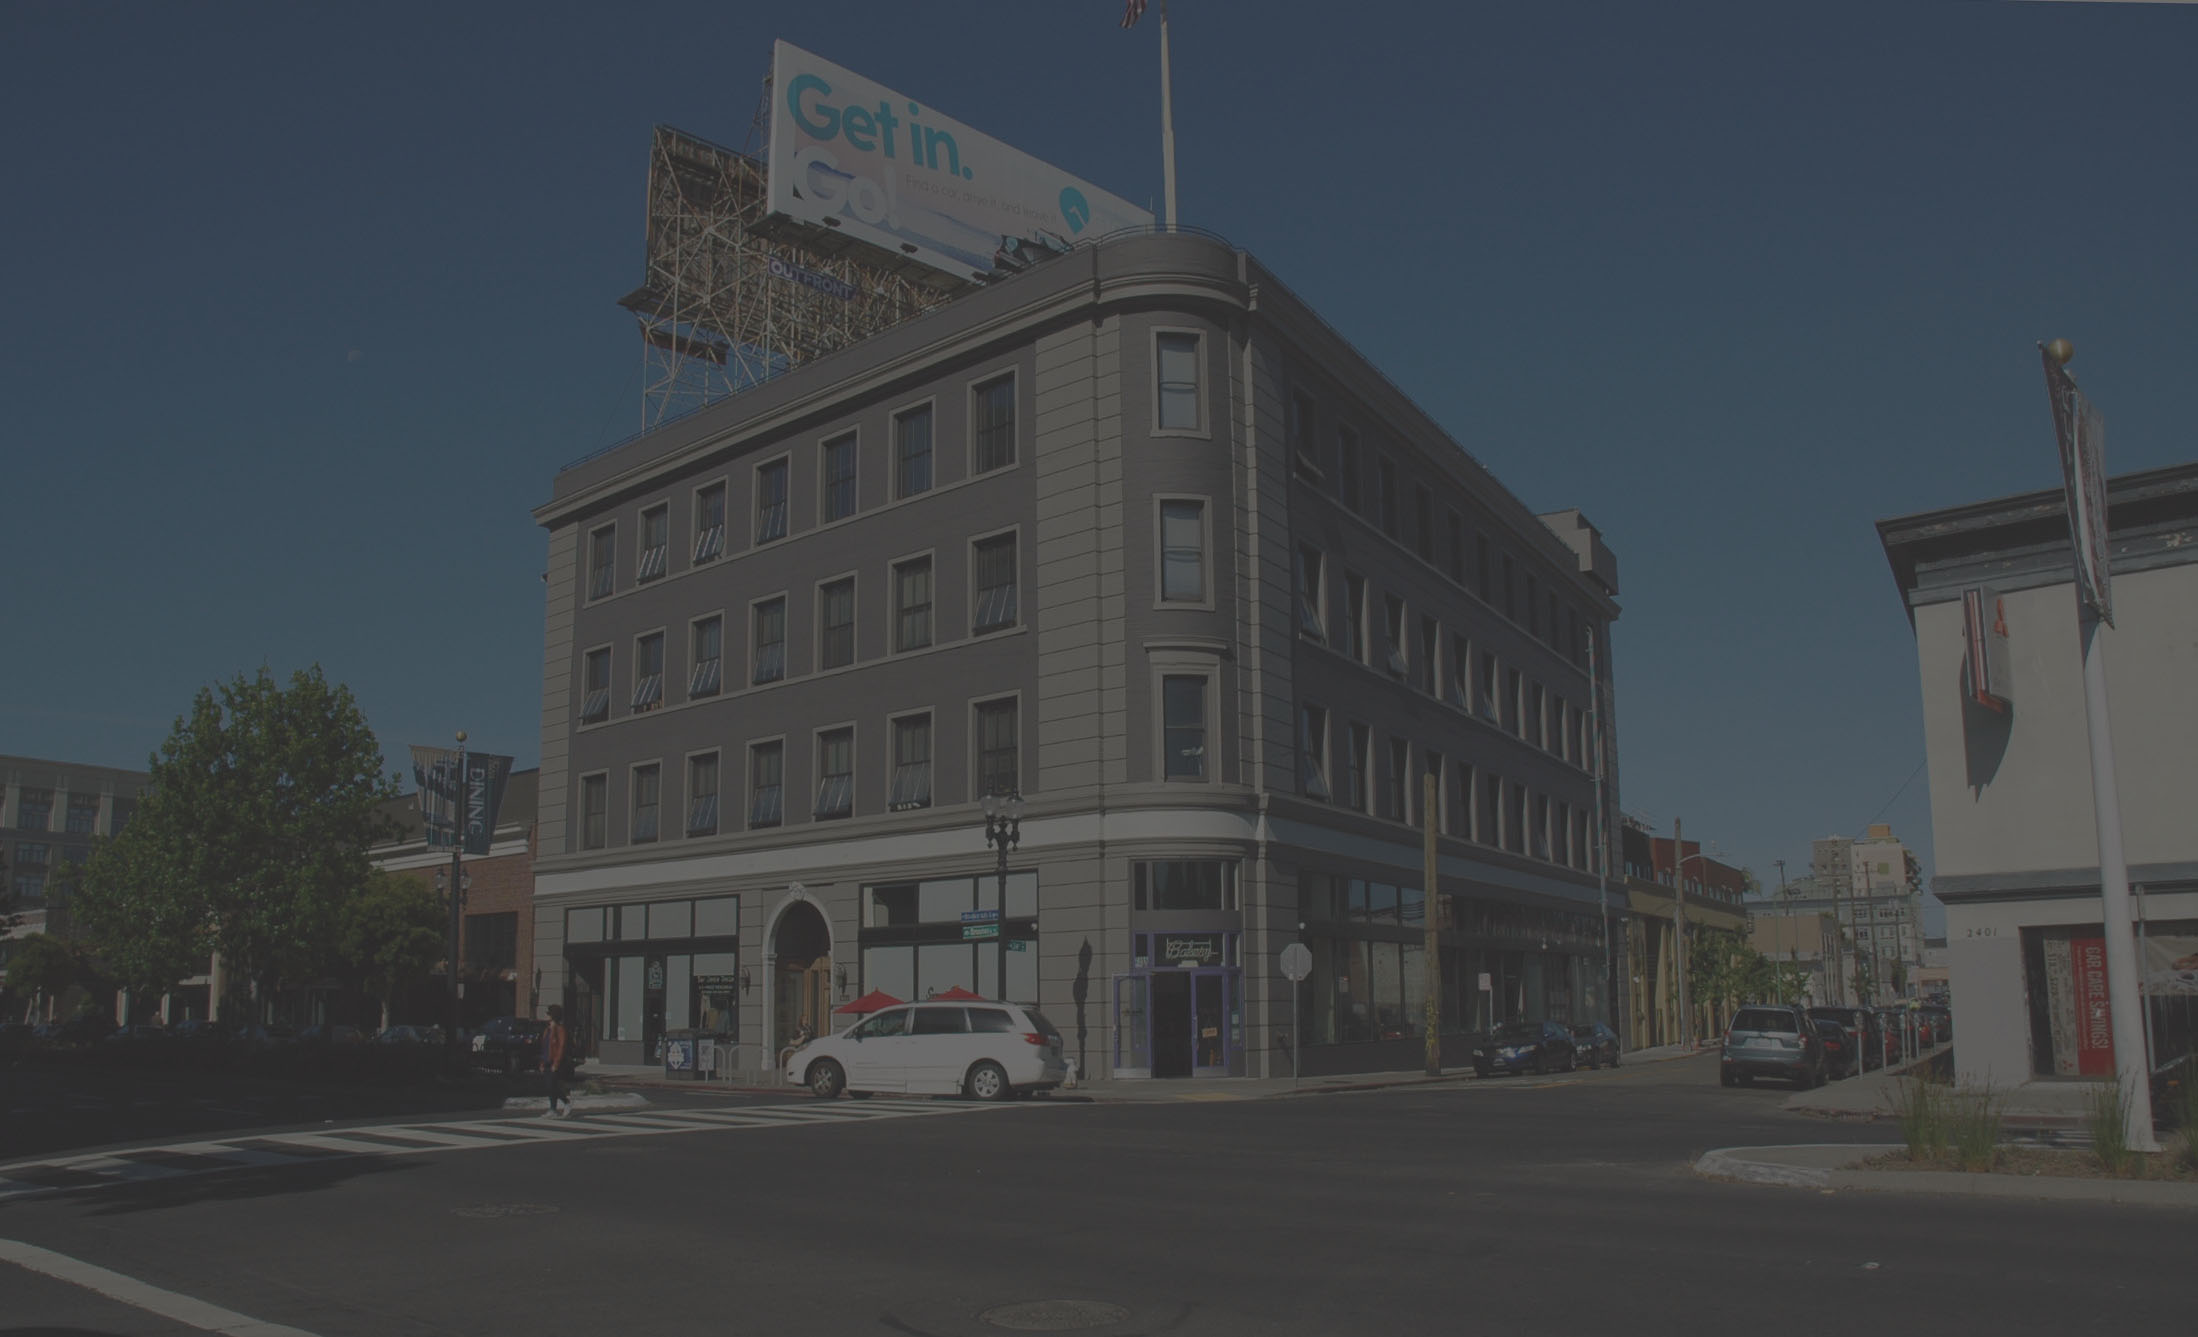  2355 Broadway is one of the defining buildings of Oakland's Broadway Auto Row. This historically significant Willis Polk designed 43,000 sf structure has been rehabilitated to the Secretary of the Interior's Standards for Historic Preservation. It h